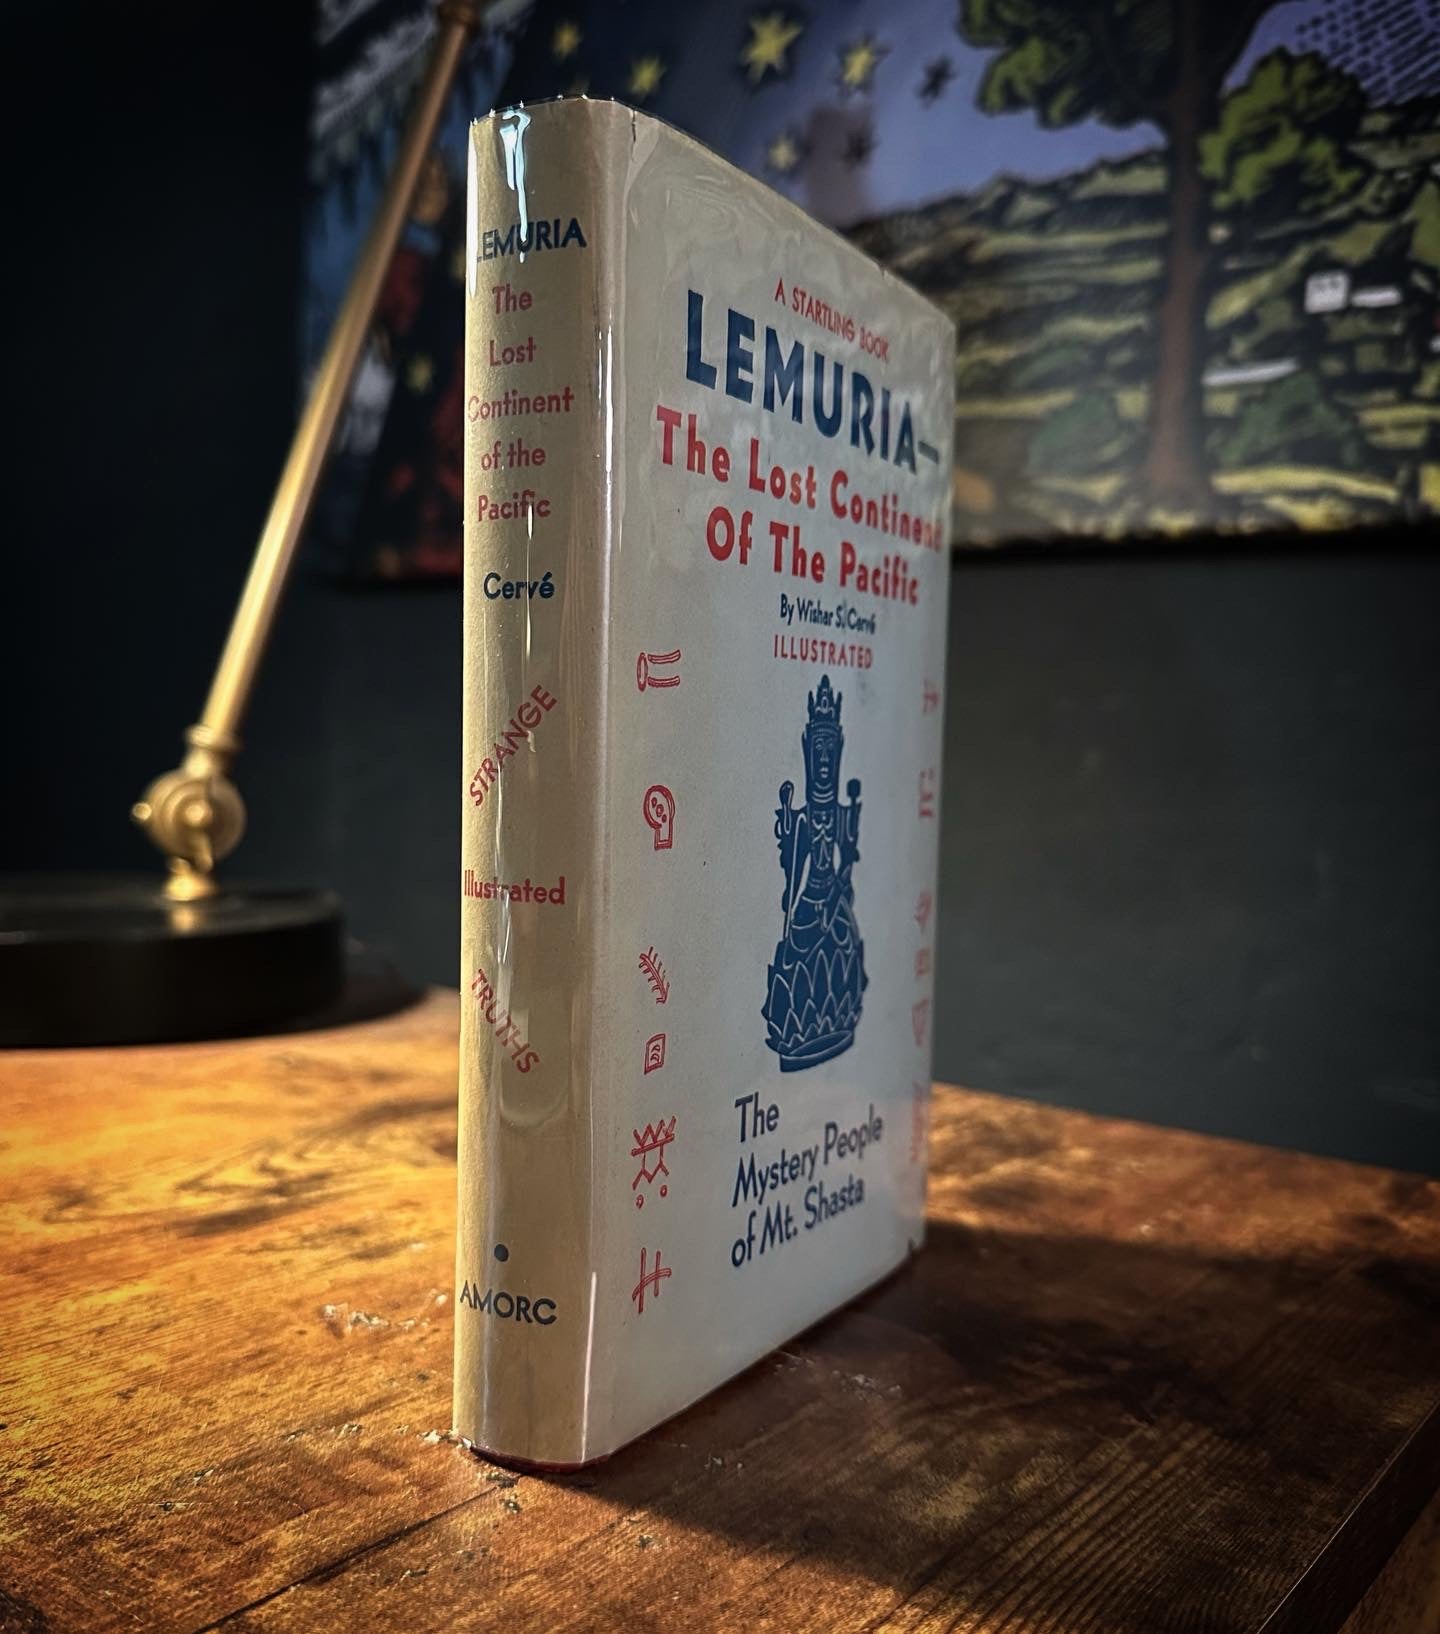 Lemuria The Lost Continent of The Pacific by W.S. Cerve